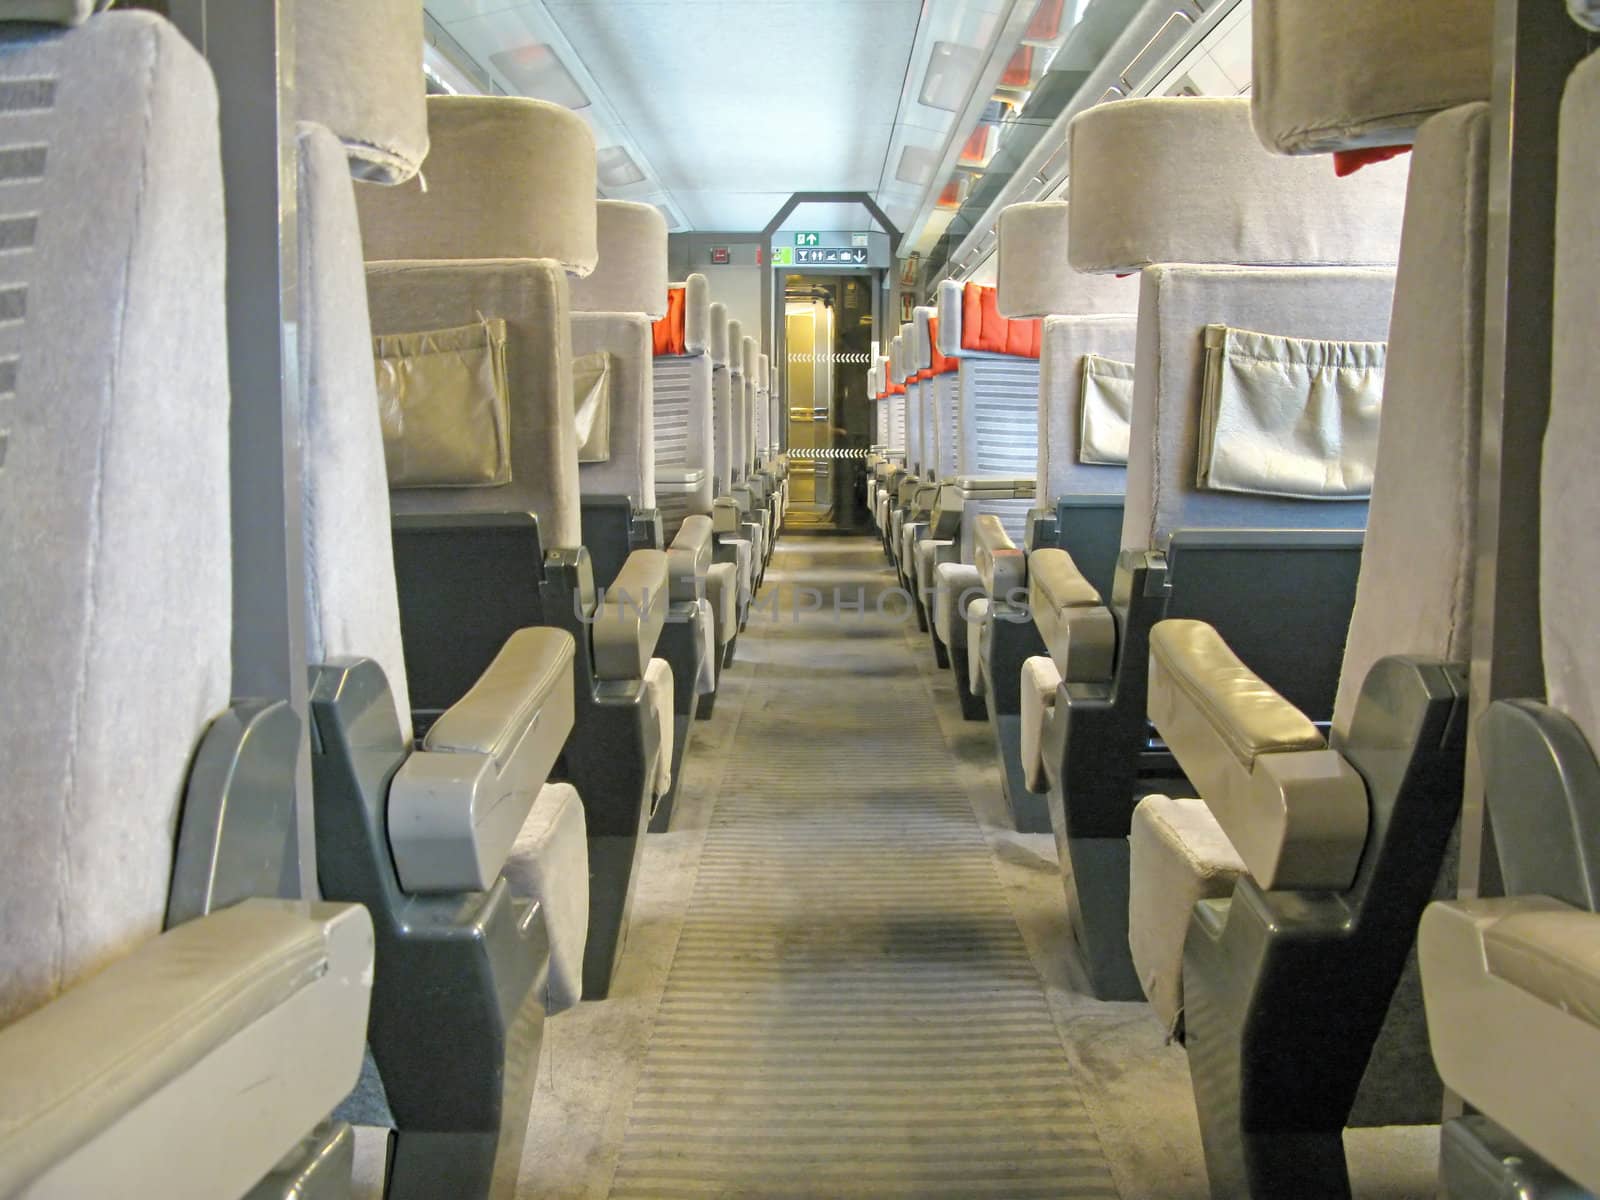 An aisle of a train with a lot of seats.